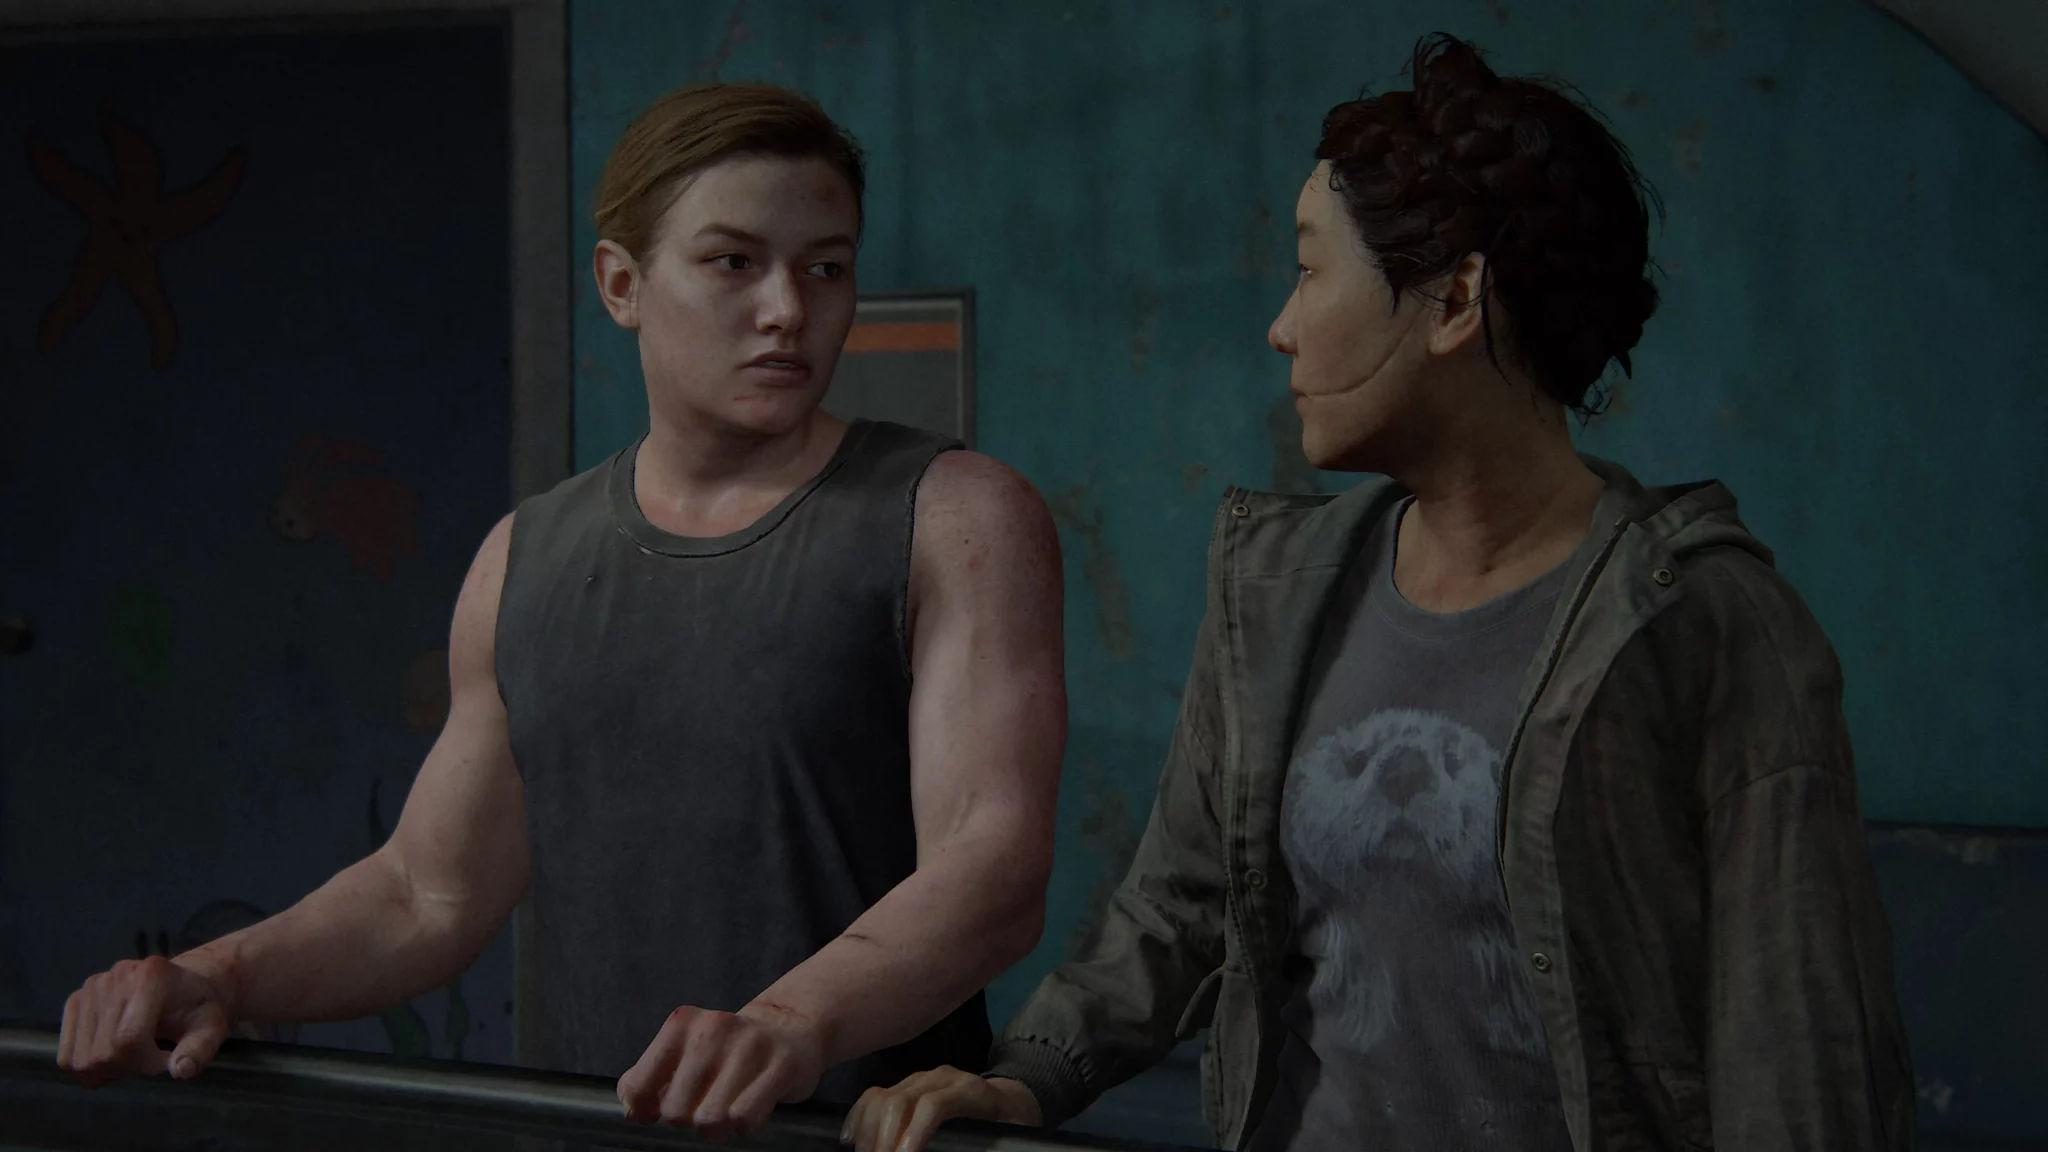 Credit: Naughty Dog (The Last of Us Part 2)